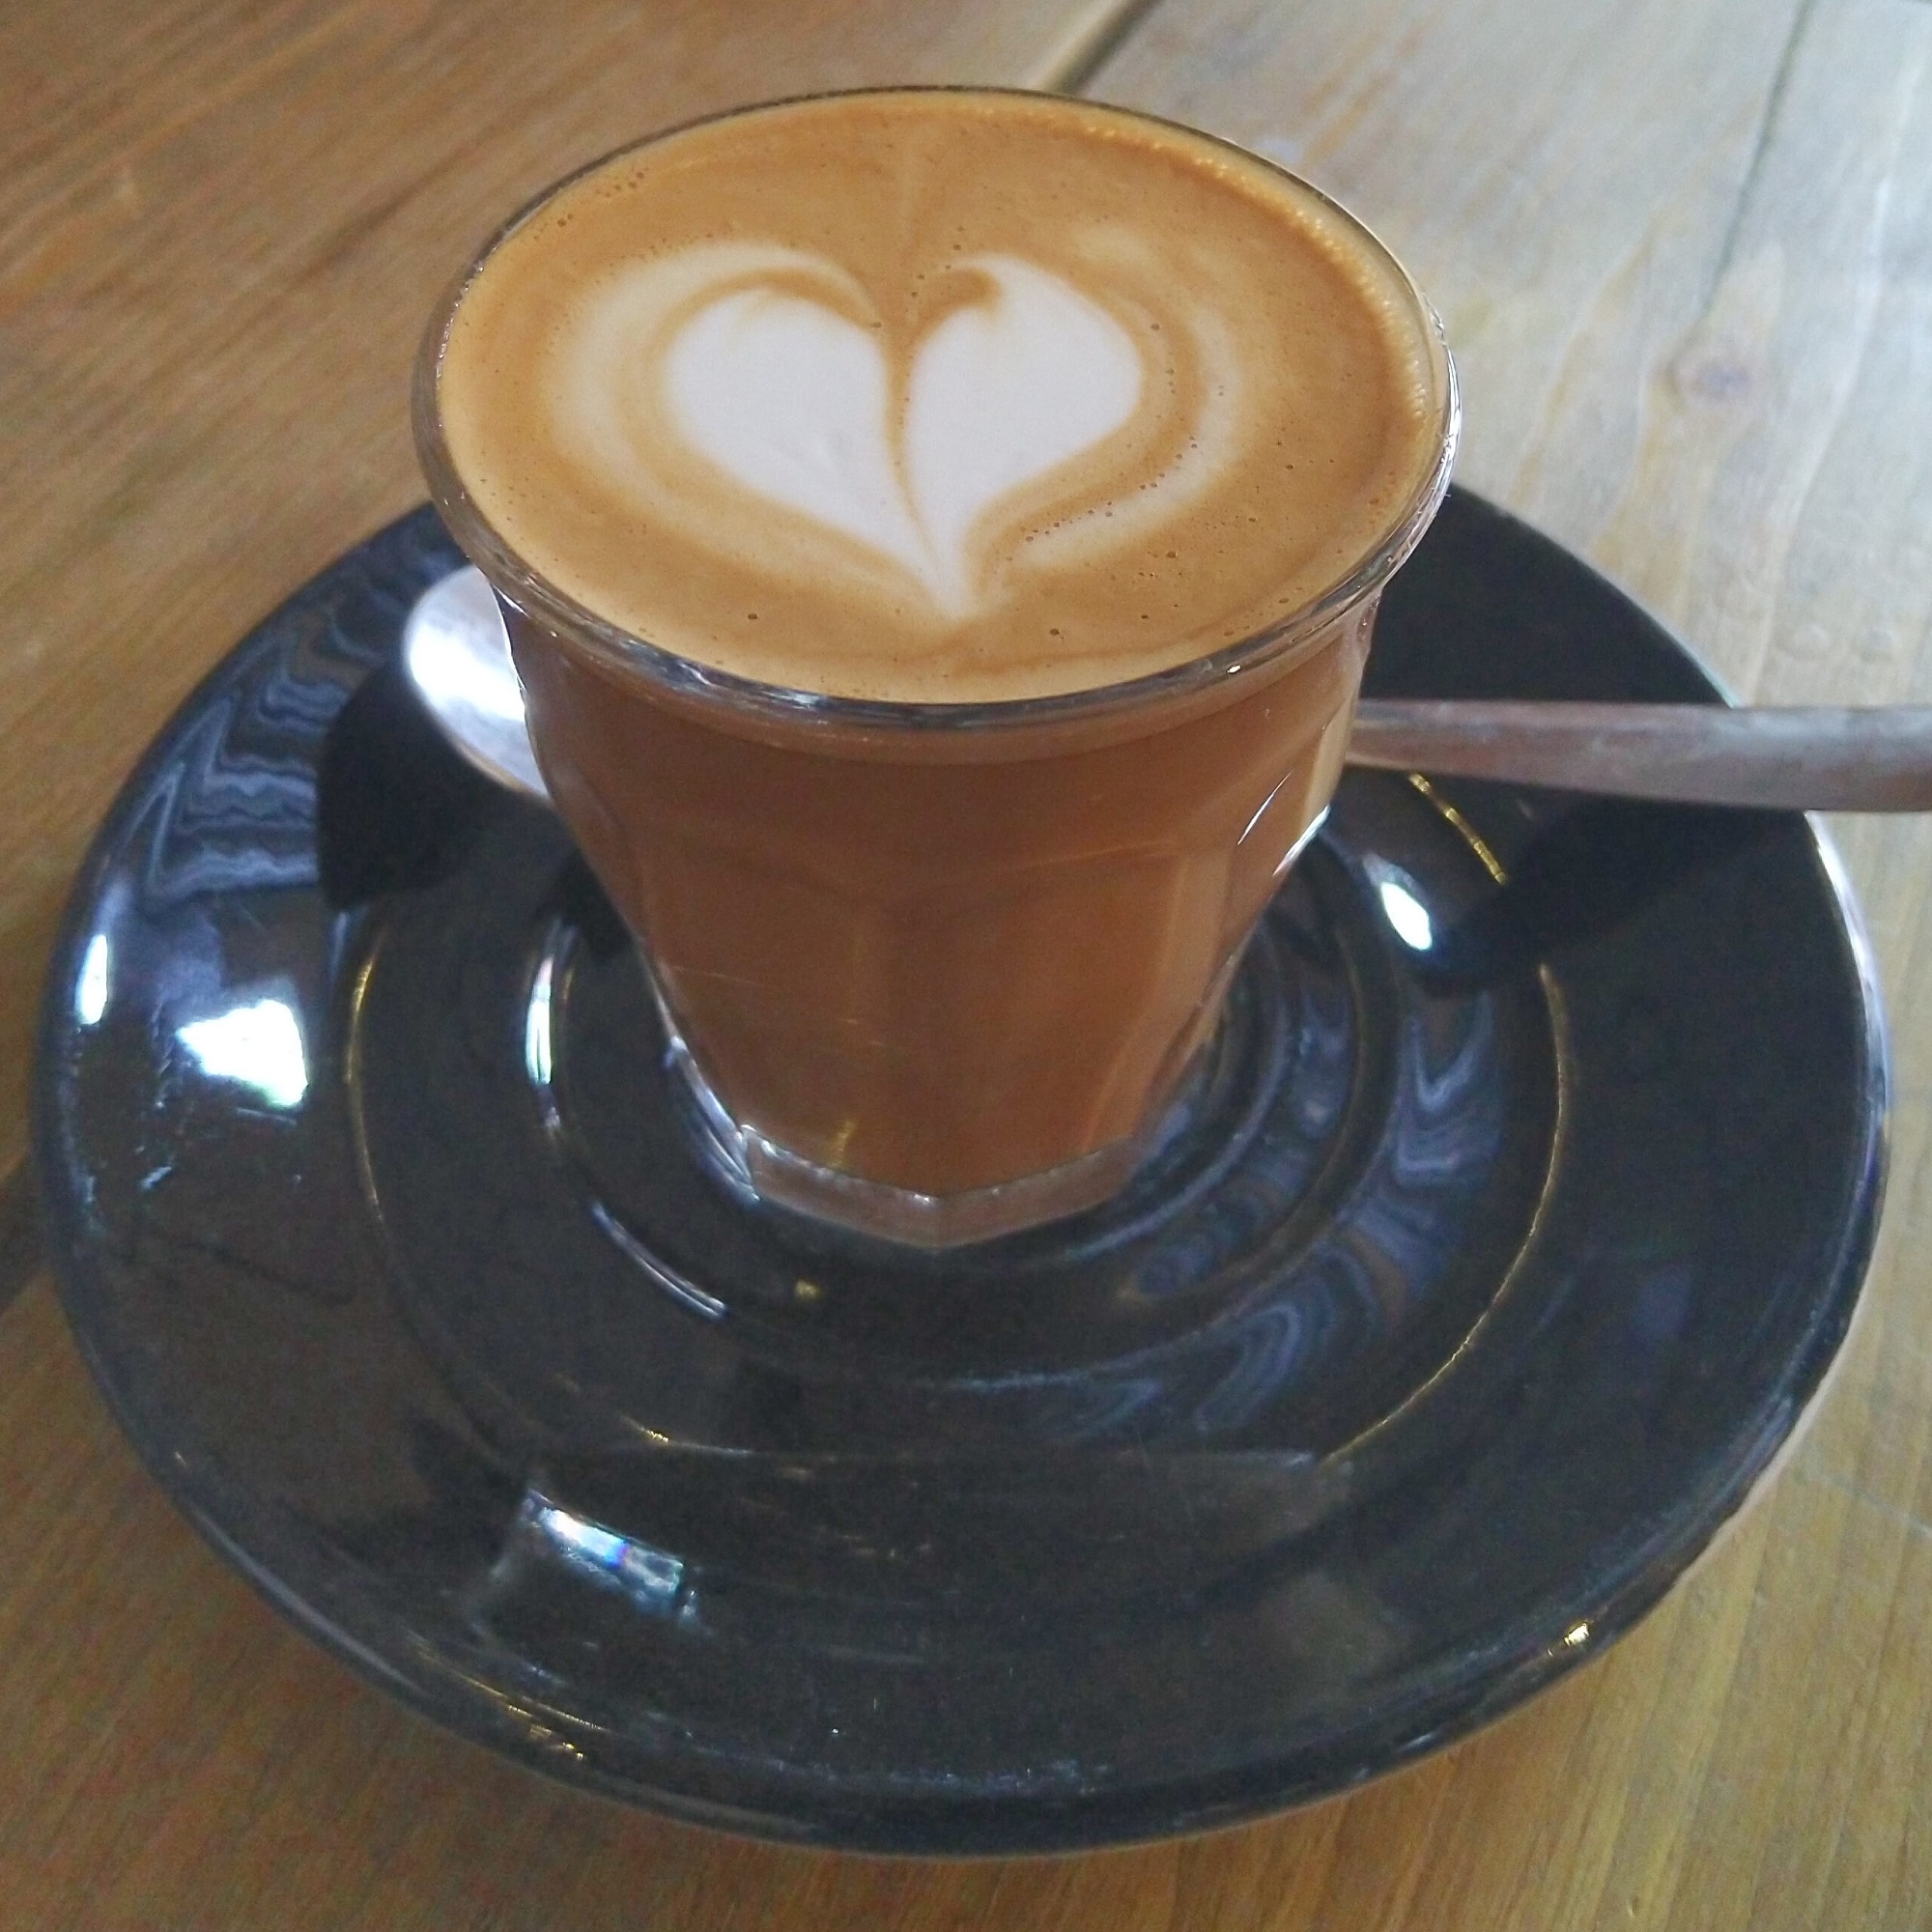 A lovely cortado, made with the seasonal house blend and served in a glass at Ditto Coffee in Liverpool.